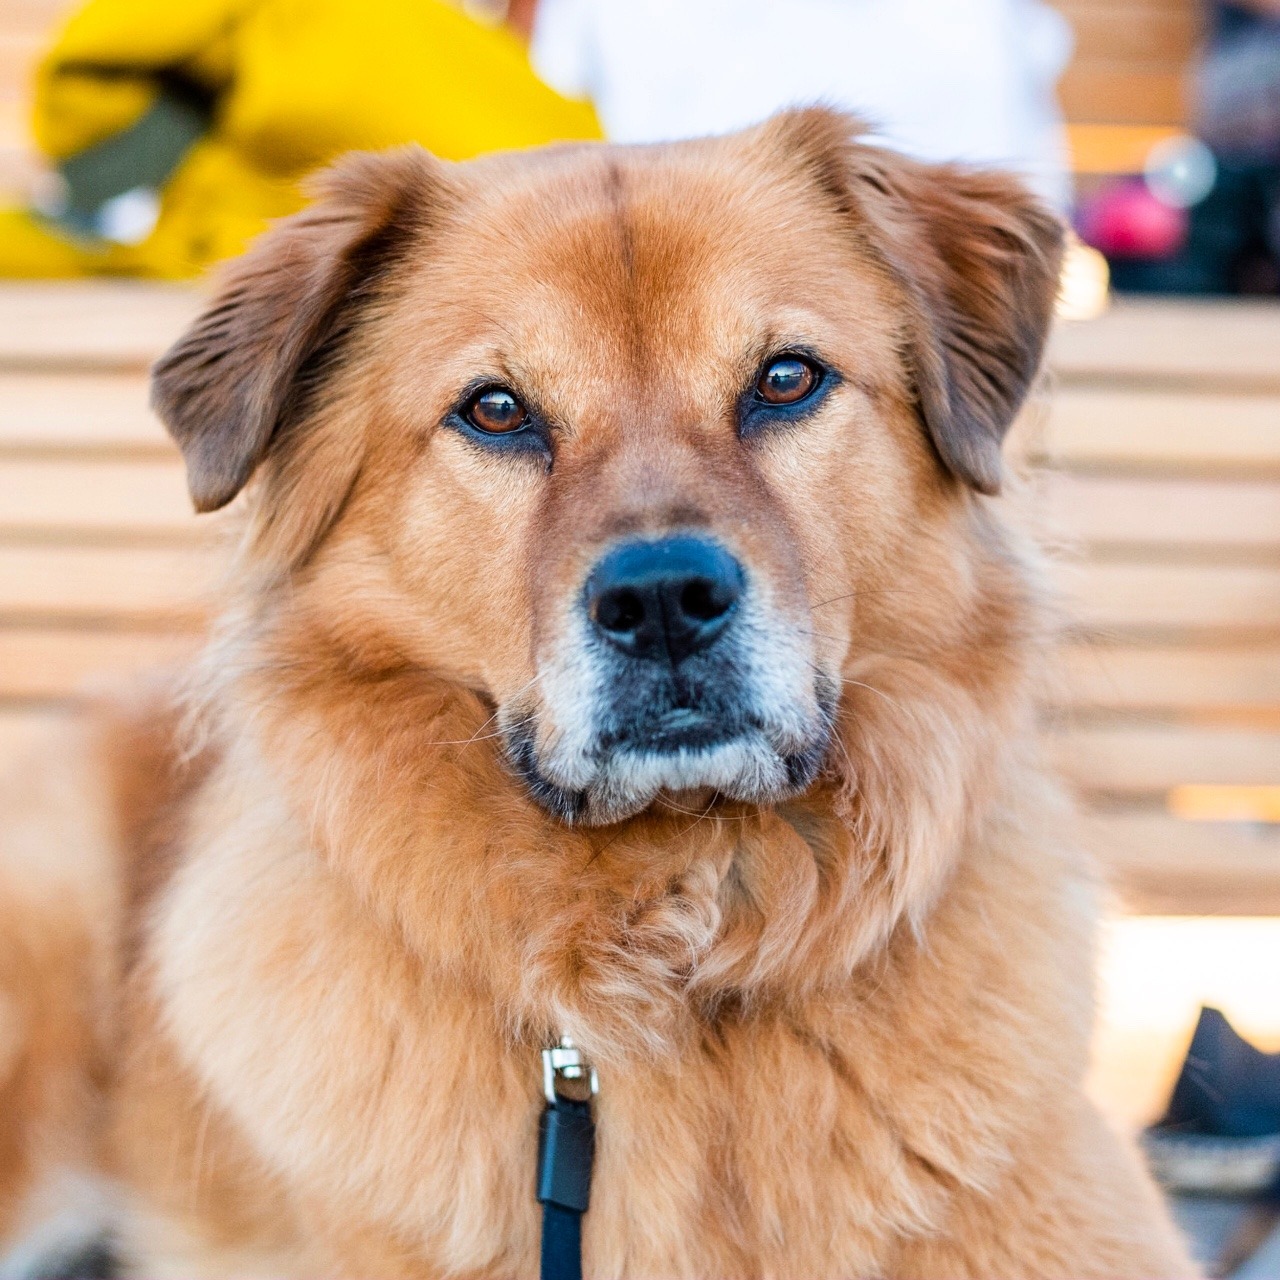 thedogist:
â€œGypsy, Golden Retriever/Chow Chow mix (8 y/o), Domino Park, Brooklyn, NY â€¢ â€œShe has a super high emotional IQ but is super awkward. We call her â€˜the thing that goes thump in the nightâ€™ â€“ she falls off the bed at night.â€ A rescue from...